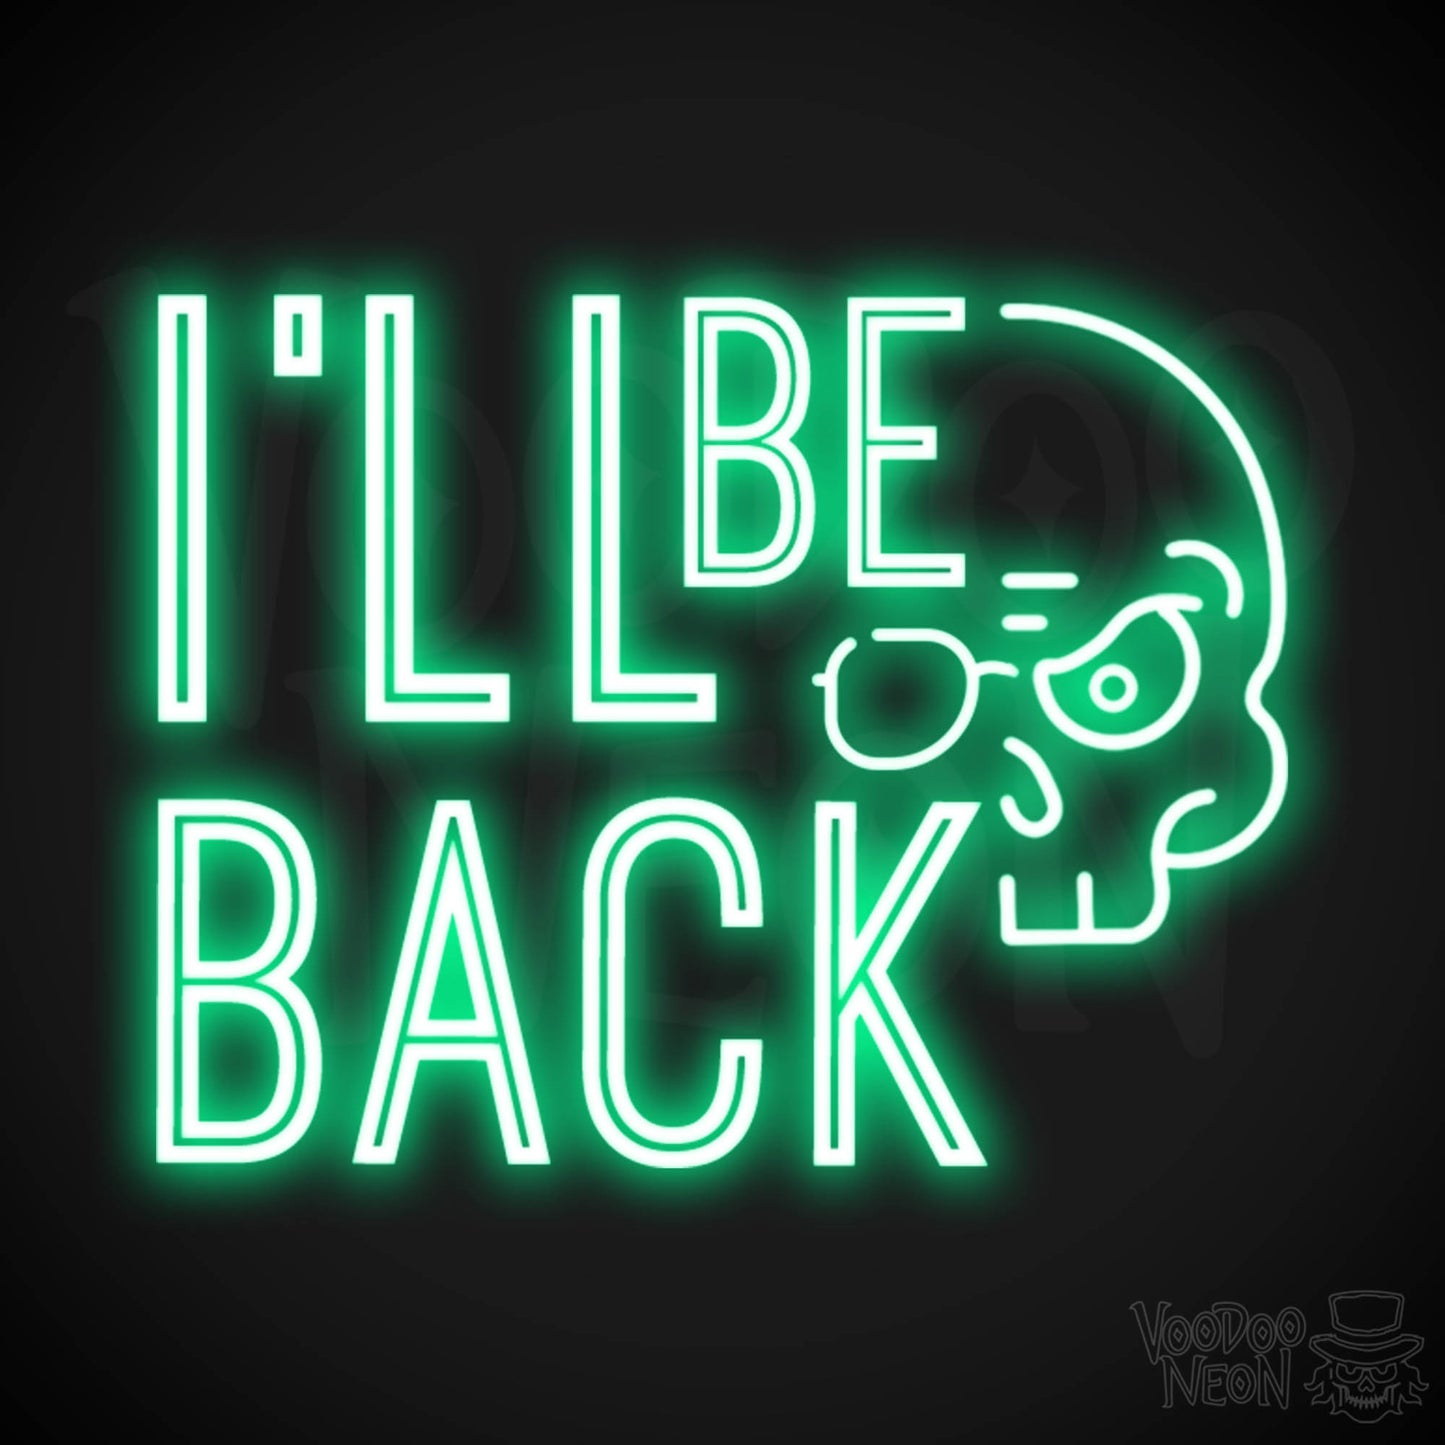 I'll Be Back Neon Sign - Neon I'll Be Back Sign - Light Up Sign Wall Art - Color Green